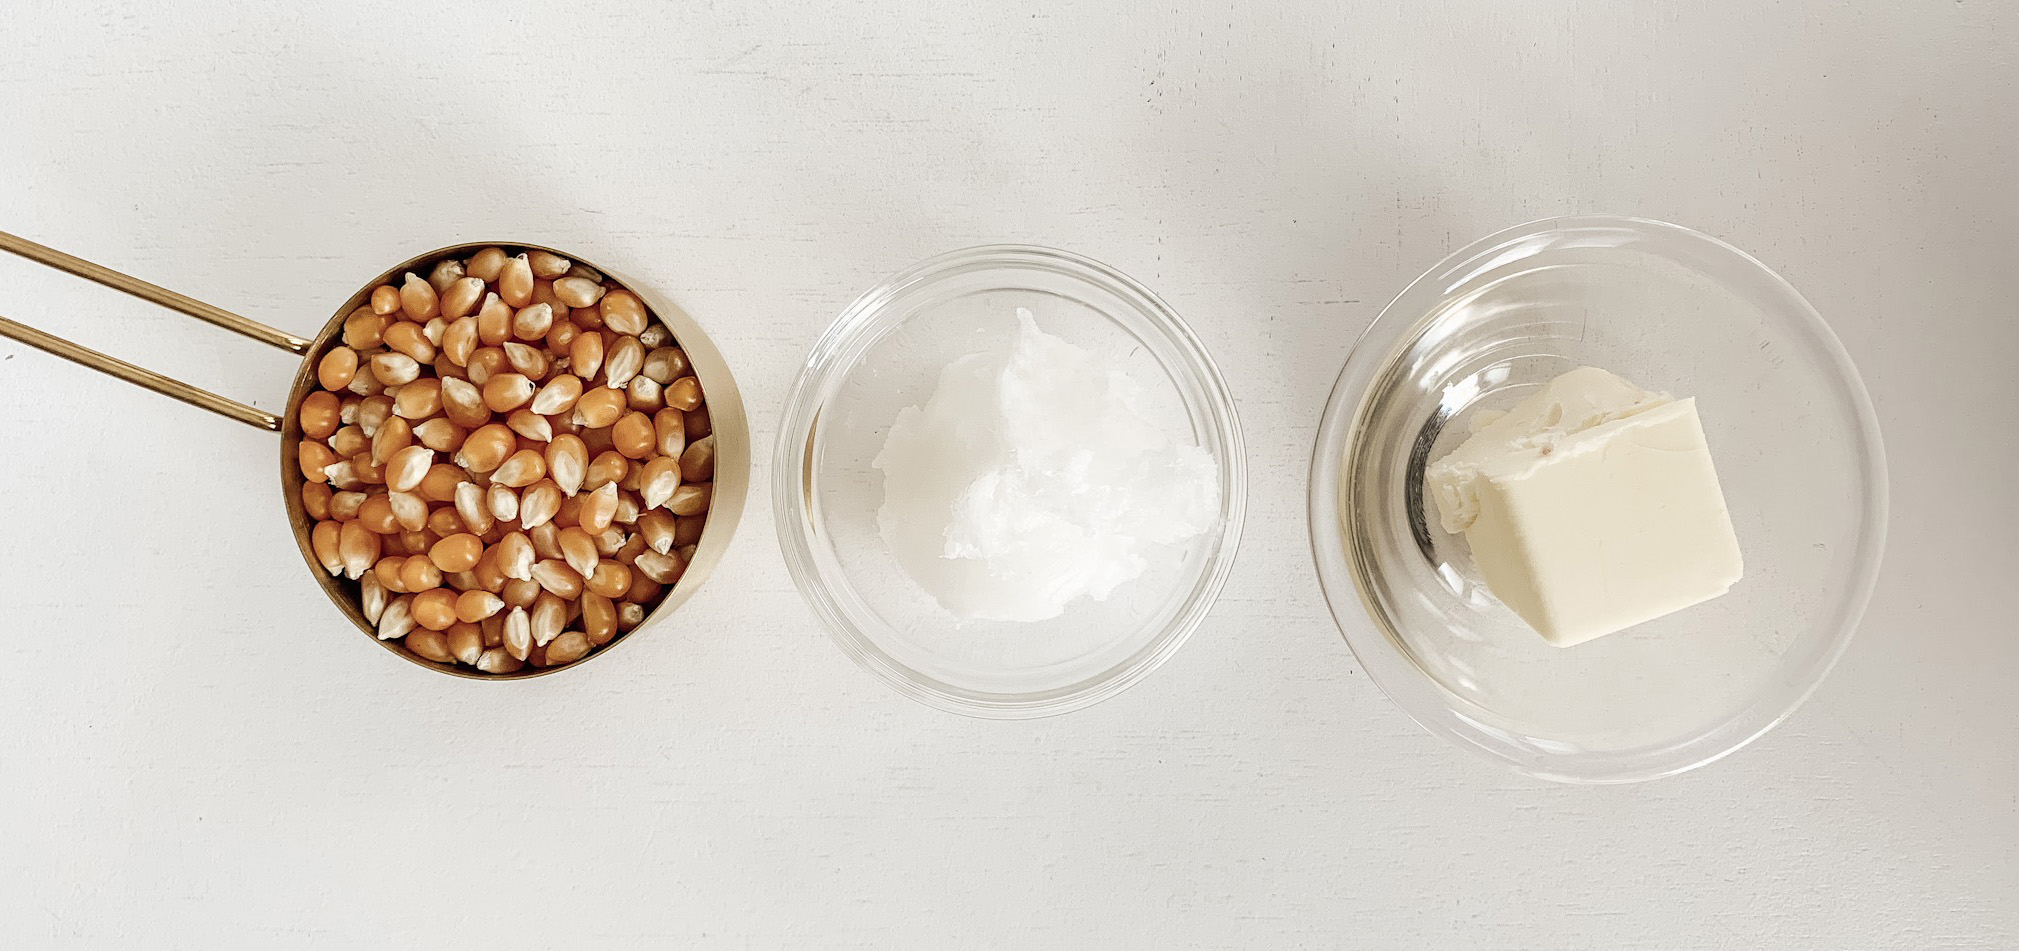 Popcorn kernels, coconut oil, butter in small glass bowls